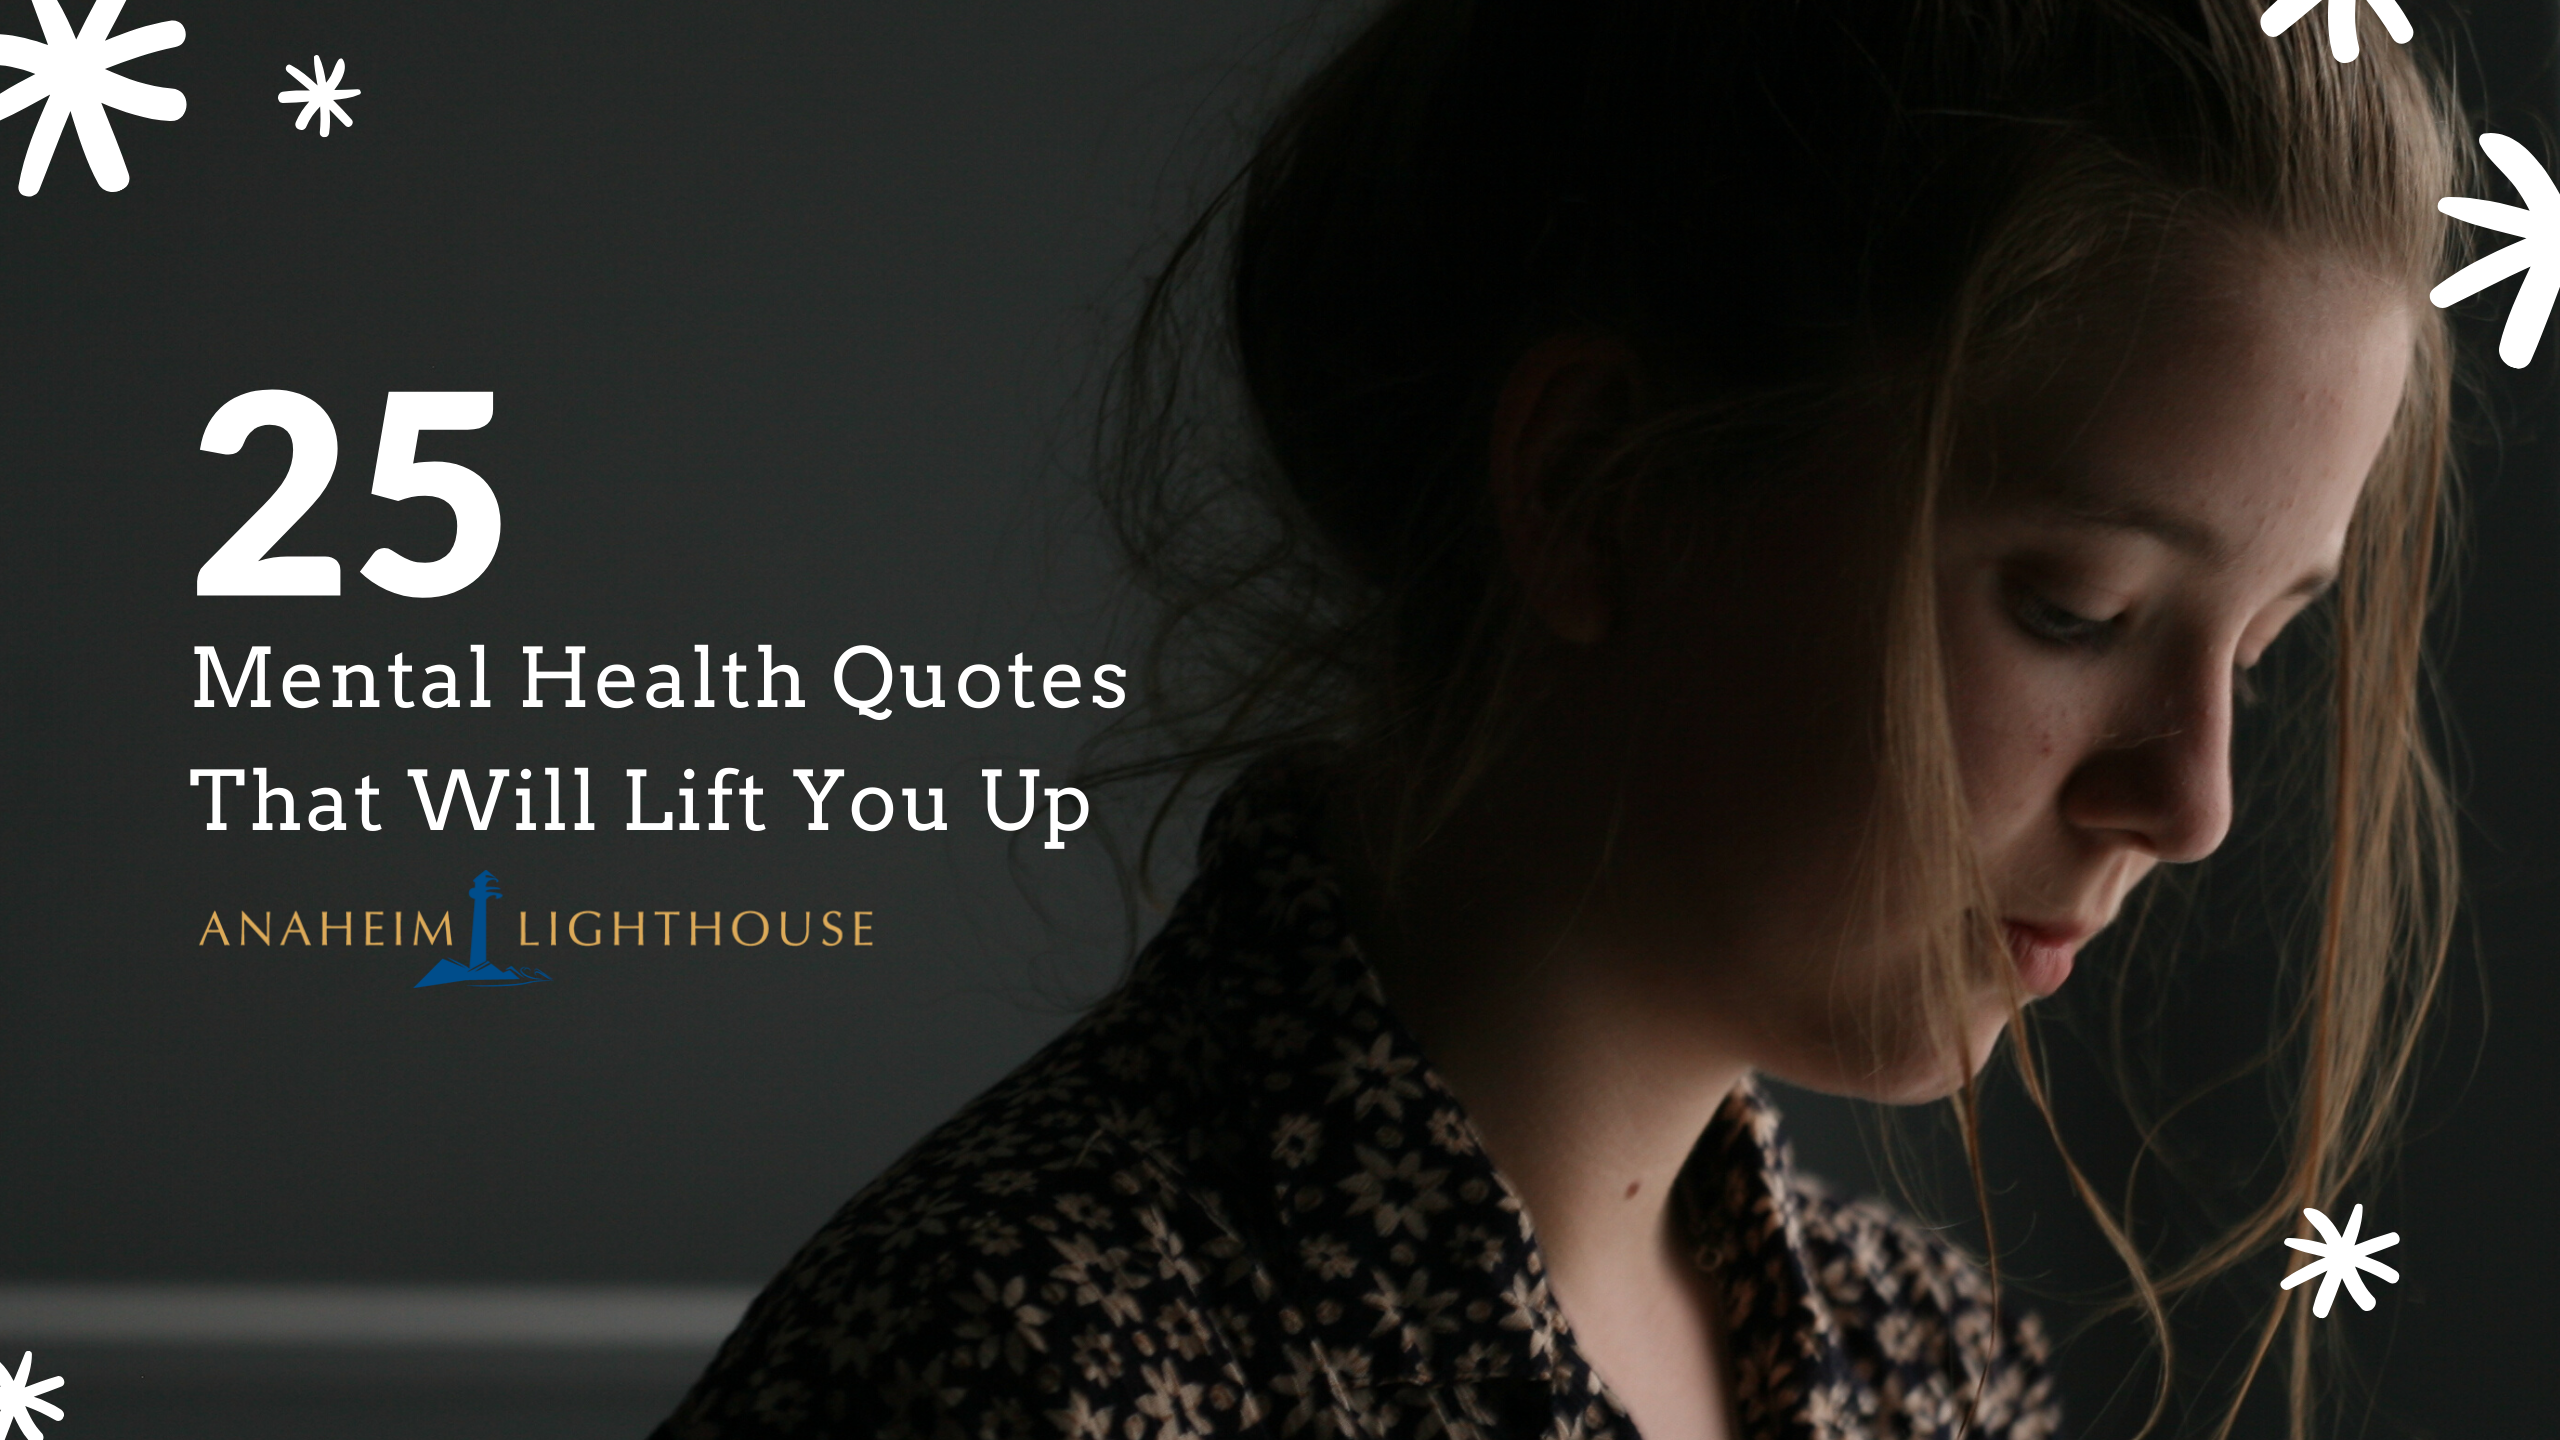 25 Mental Health Quotes That Will Lift You Up - Anaheim Lighthouse